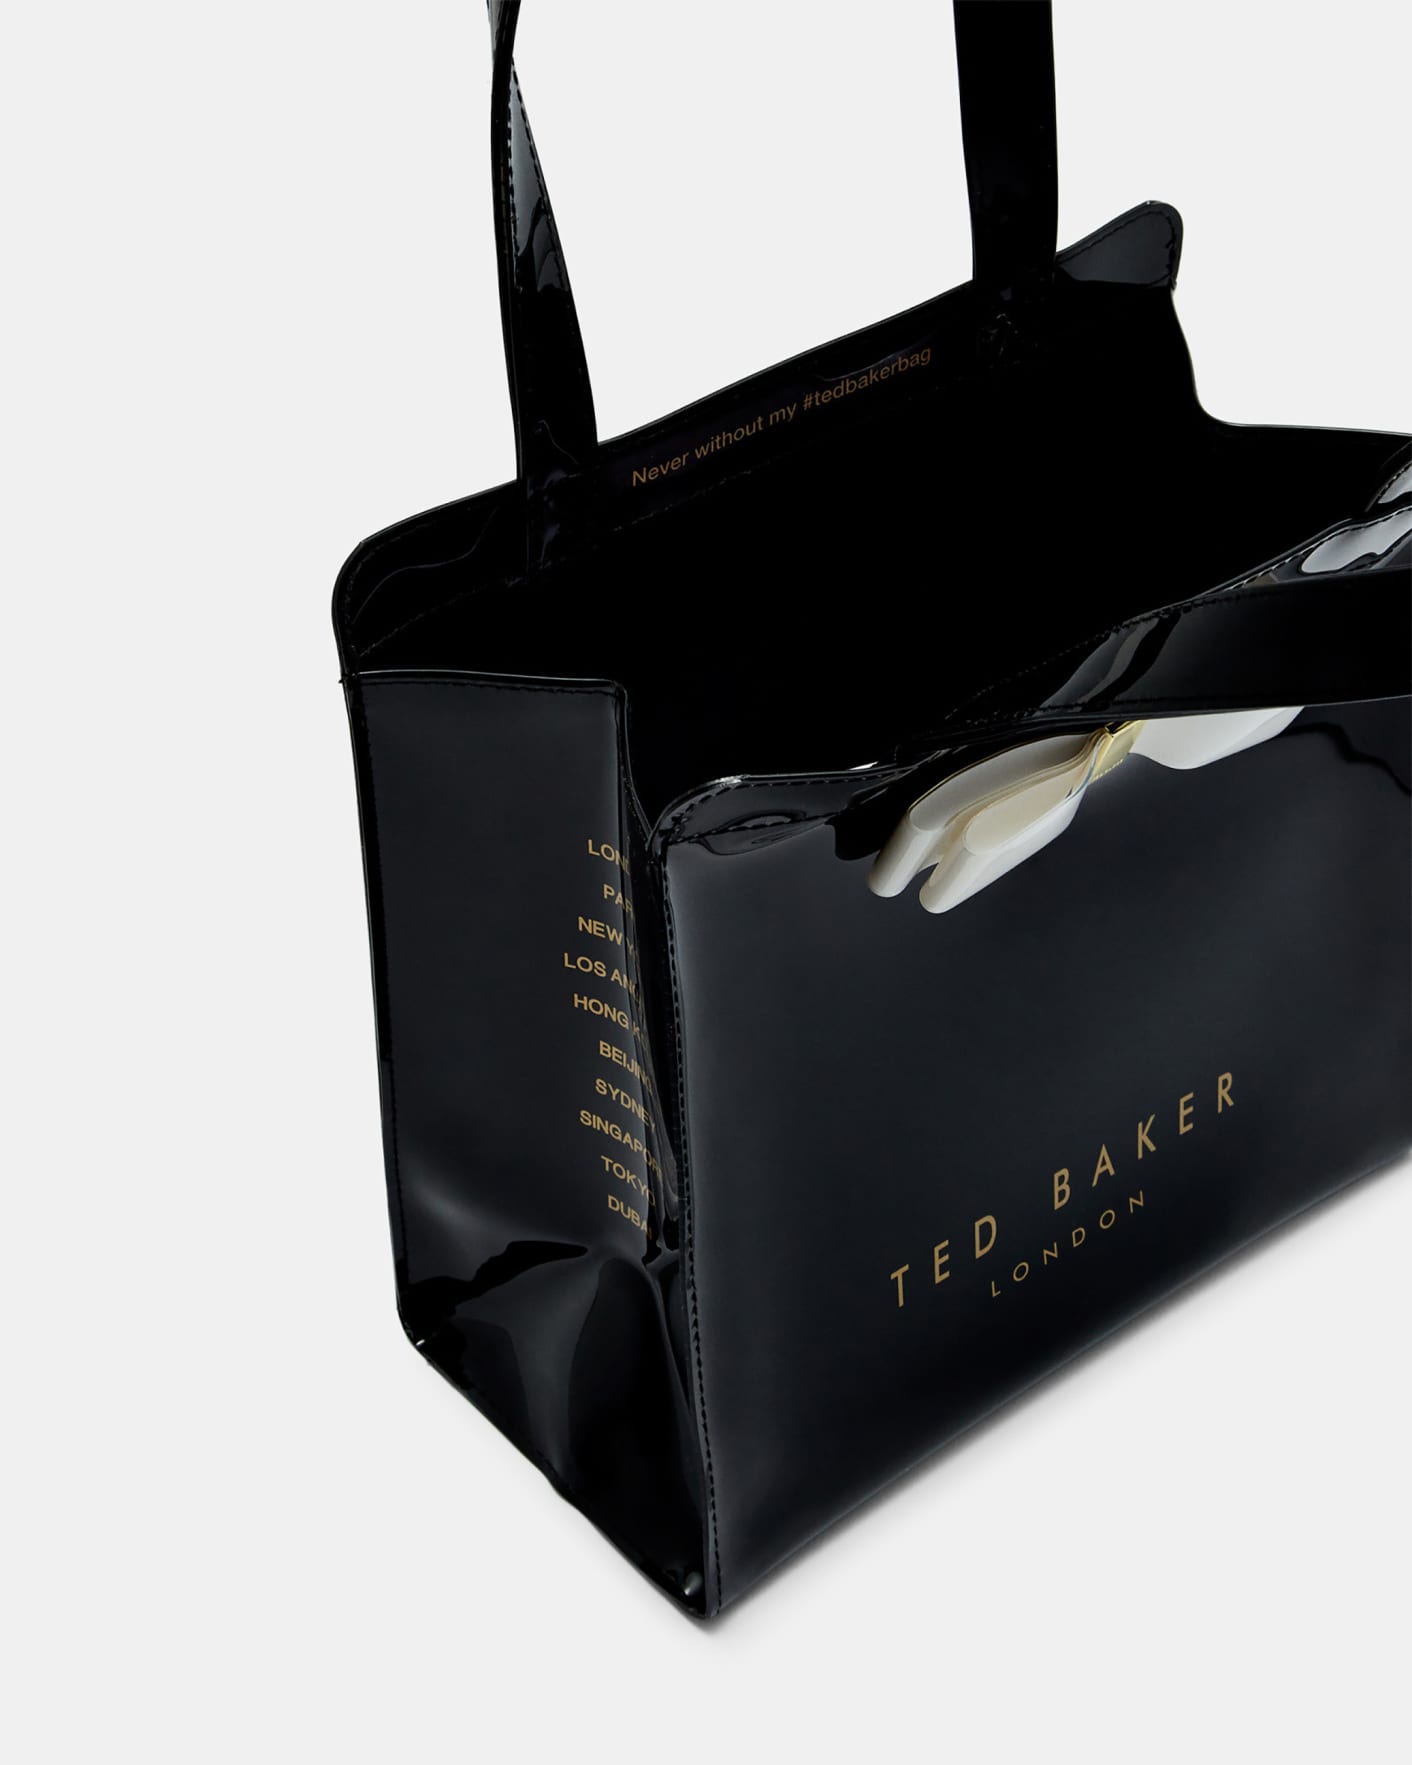 Black Bow Detail Small Icon Bag Ted Baker